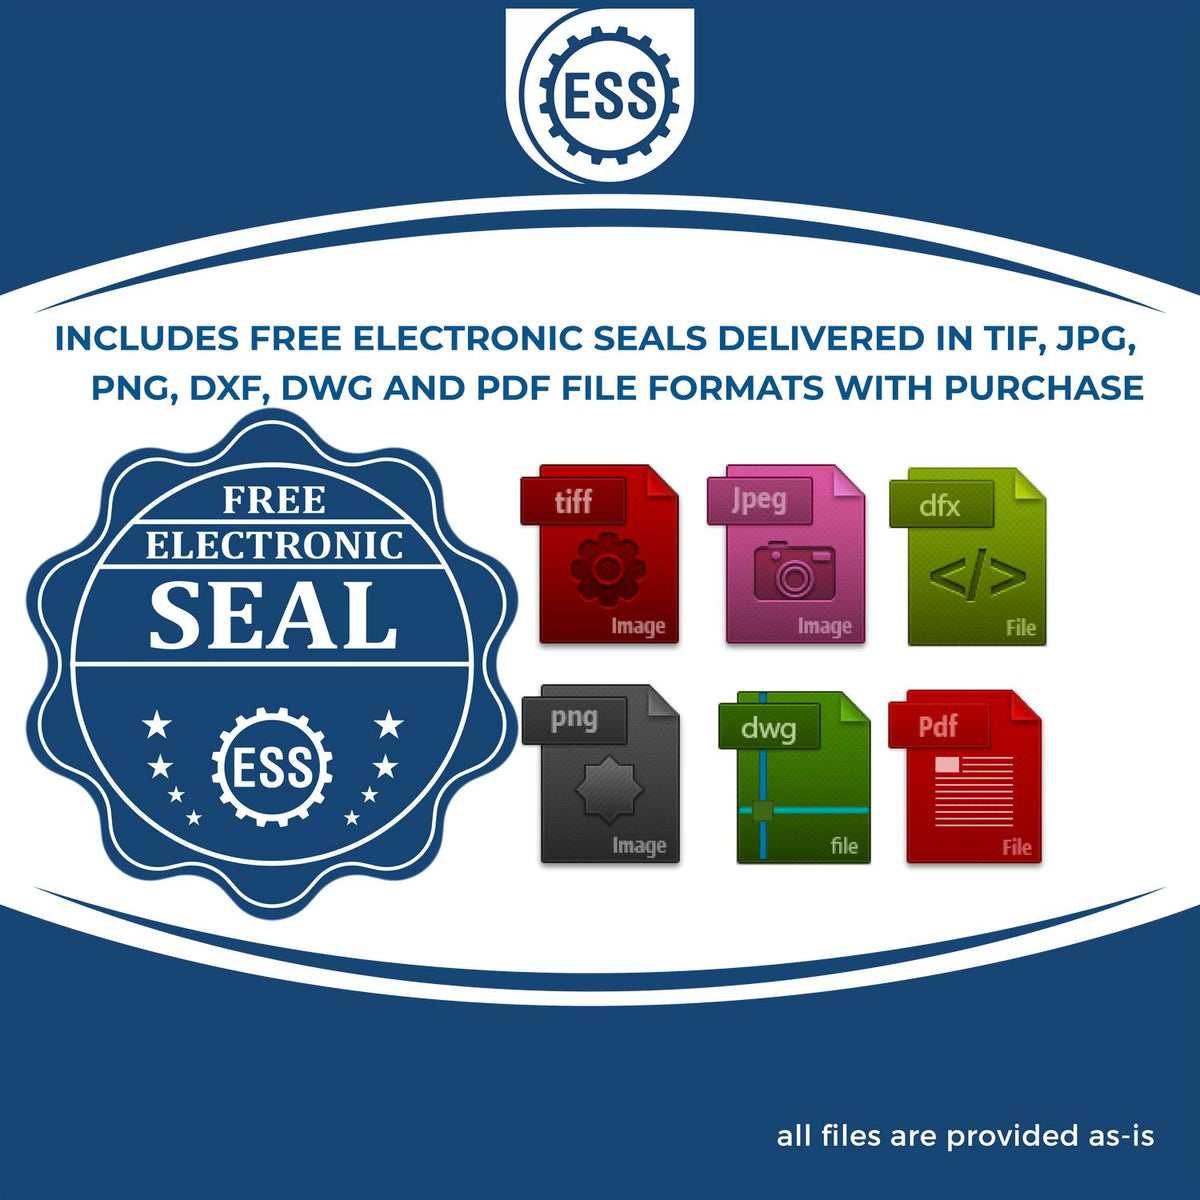 An infographic for the free electronic seal for the Wooden Handle Puerto Rico Rectangular Notary Public Stamp illustrating the different file type icons such as DXF, DWG, TIF, JPG and PNG.